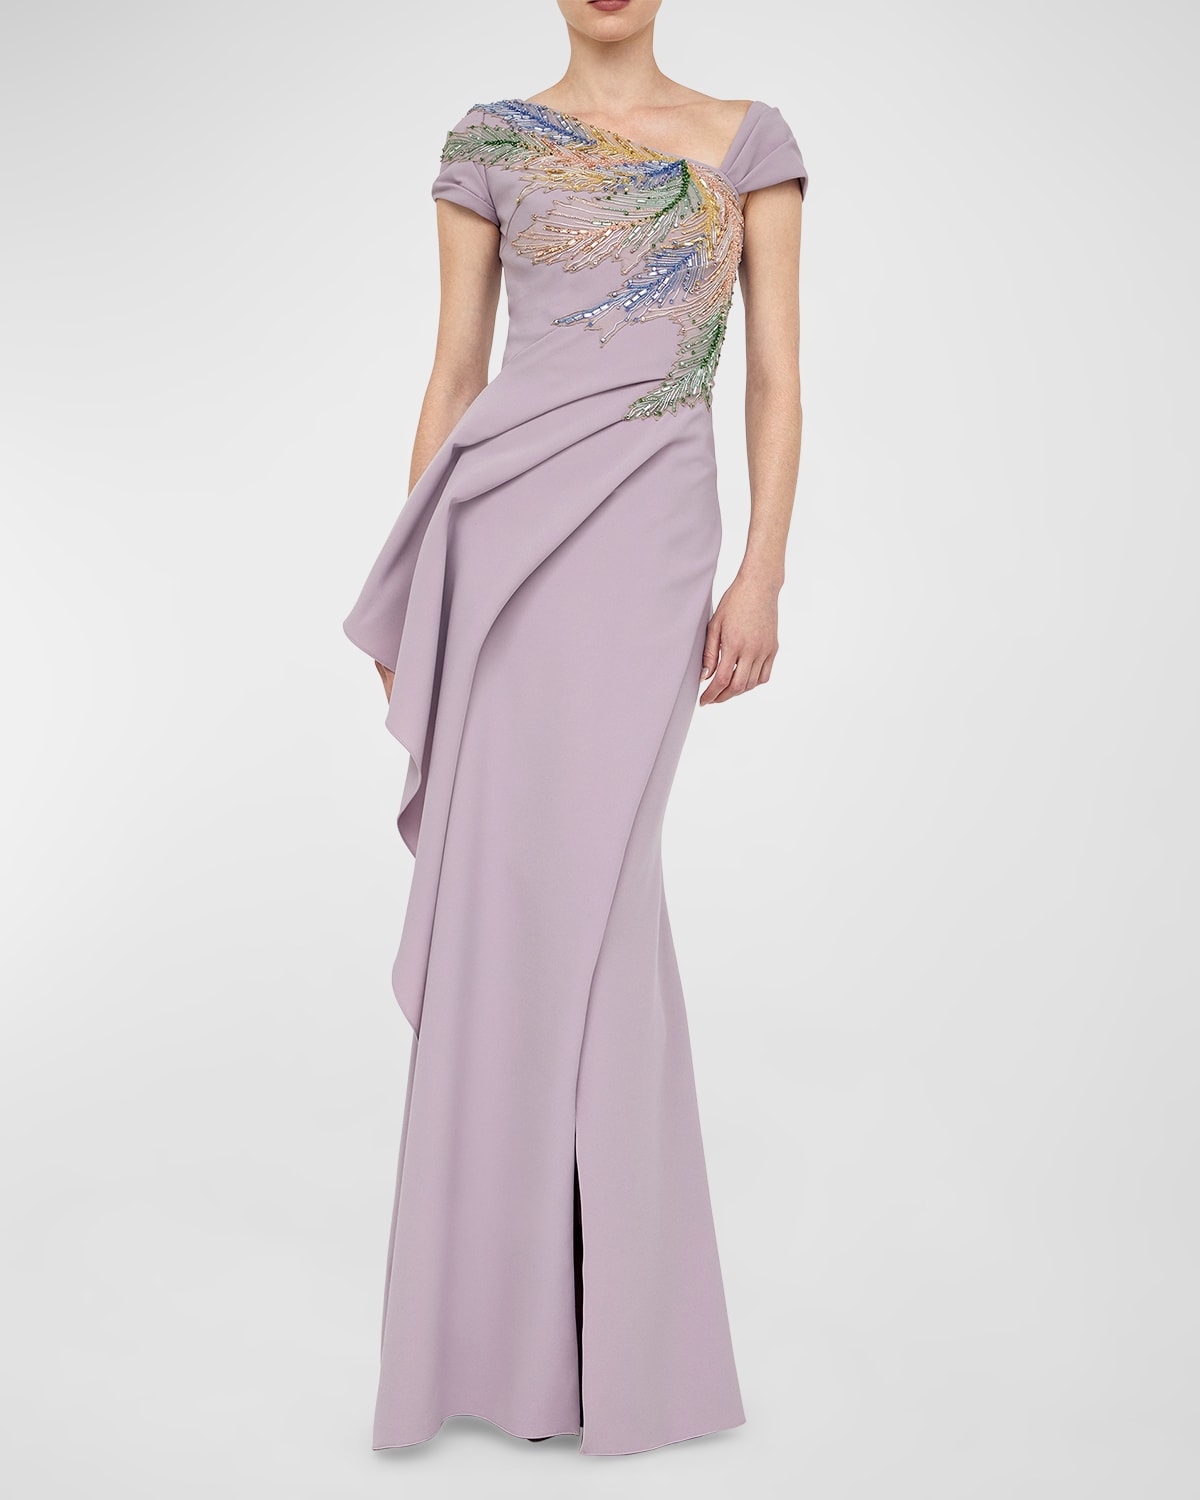 Natalie Beaded Draped Gown